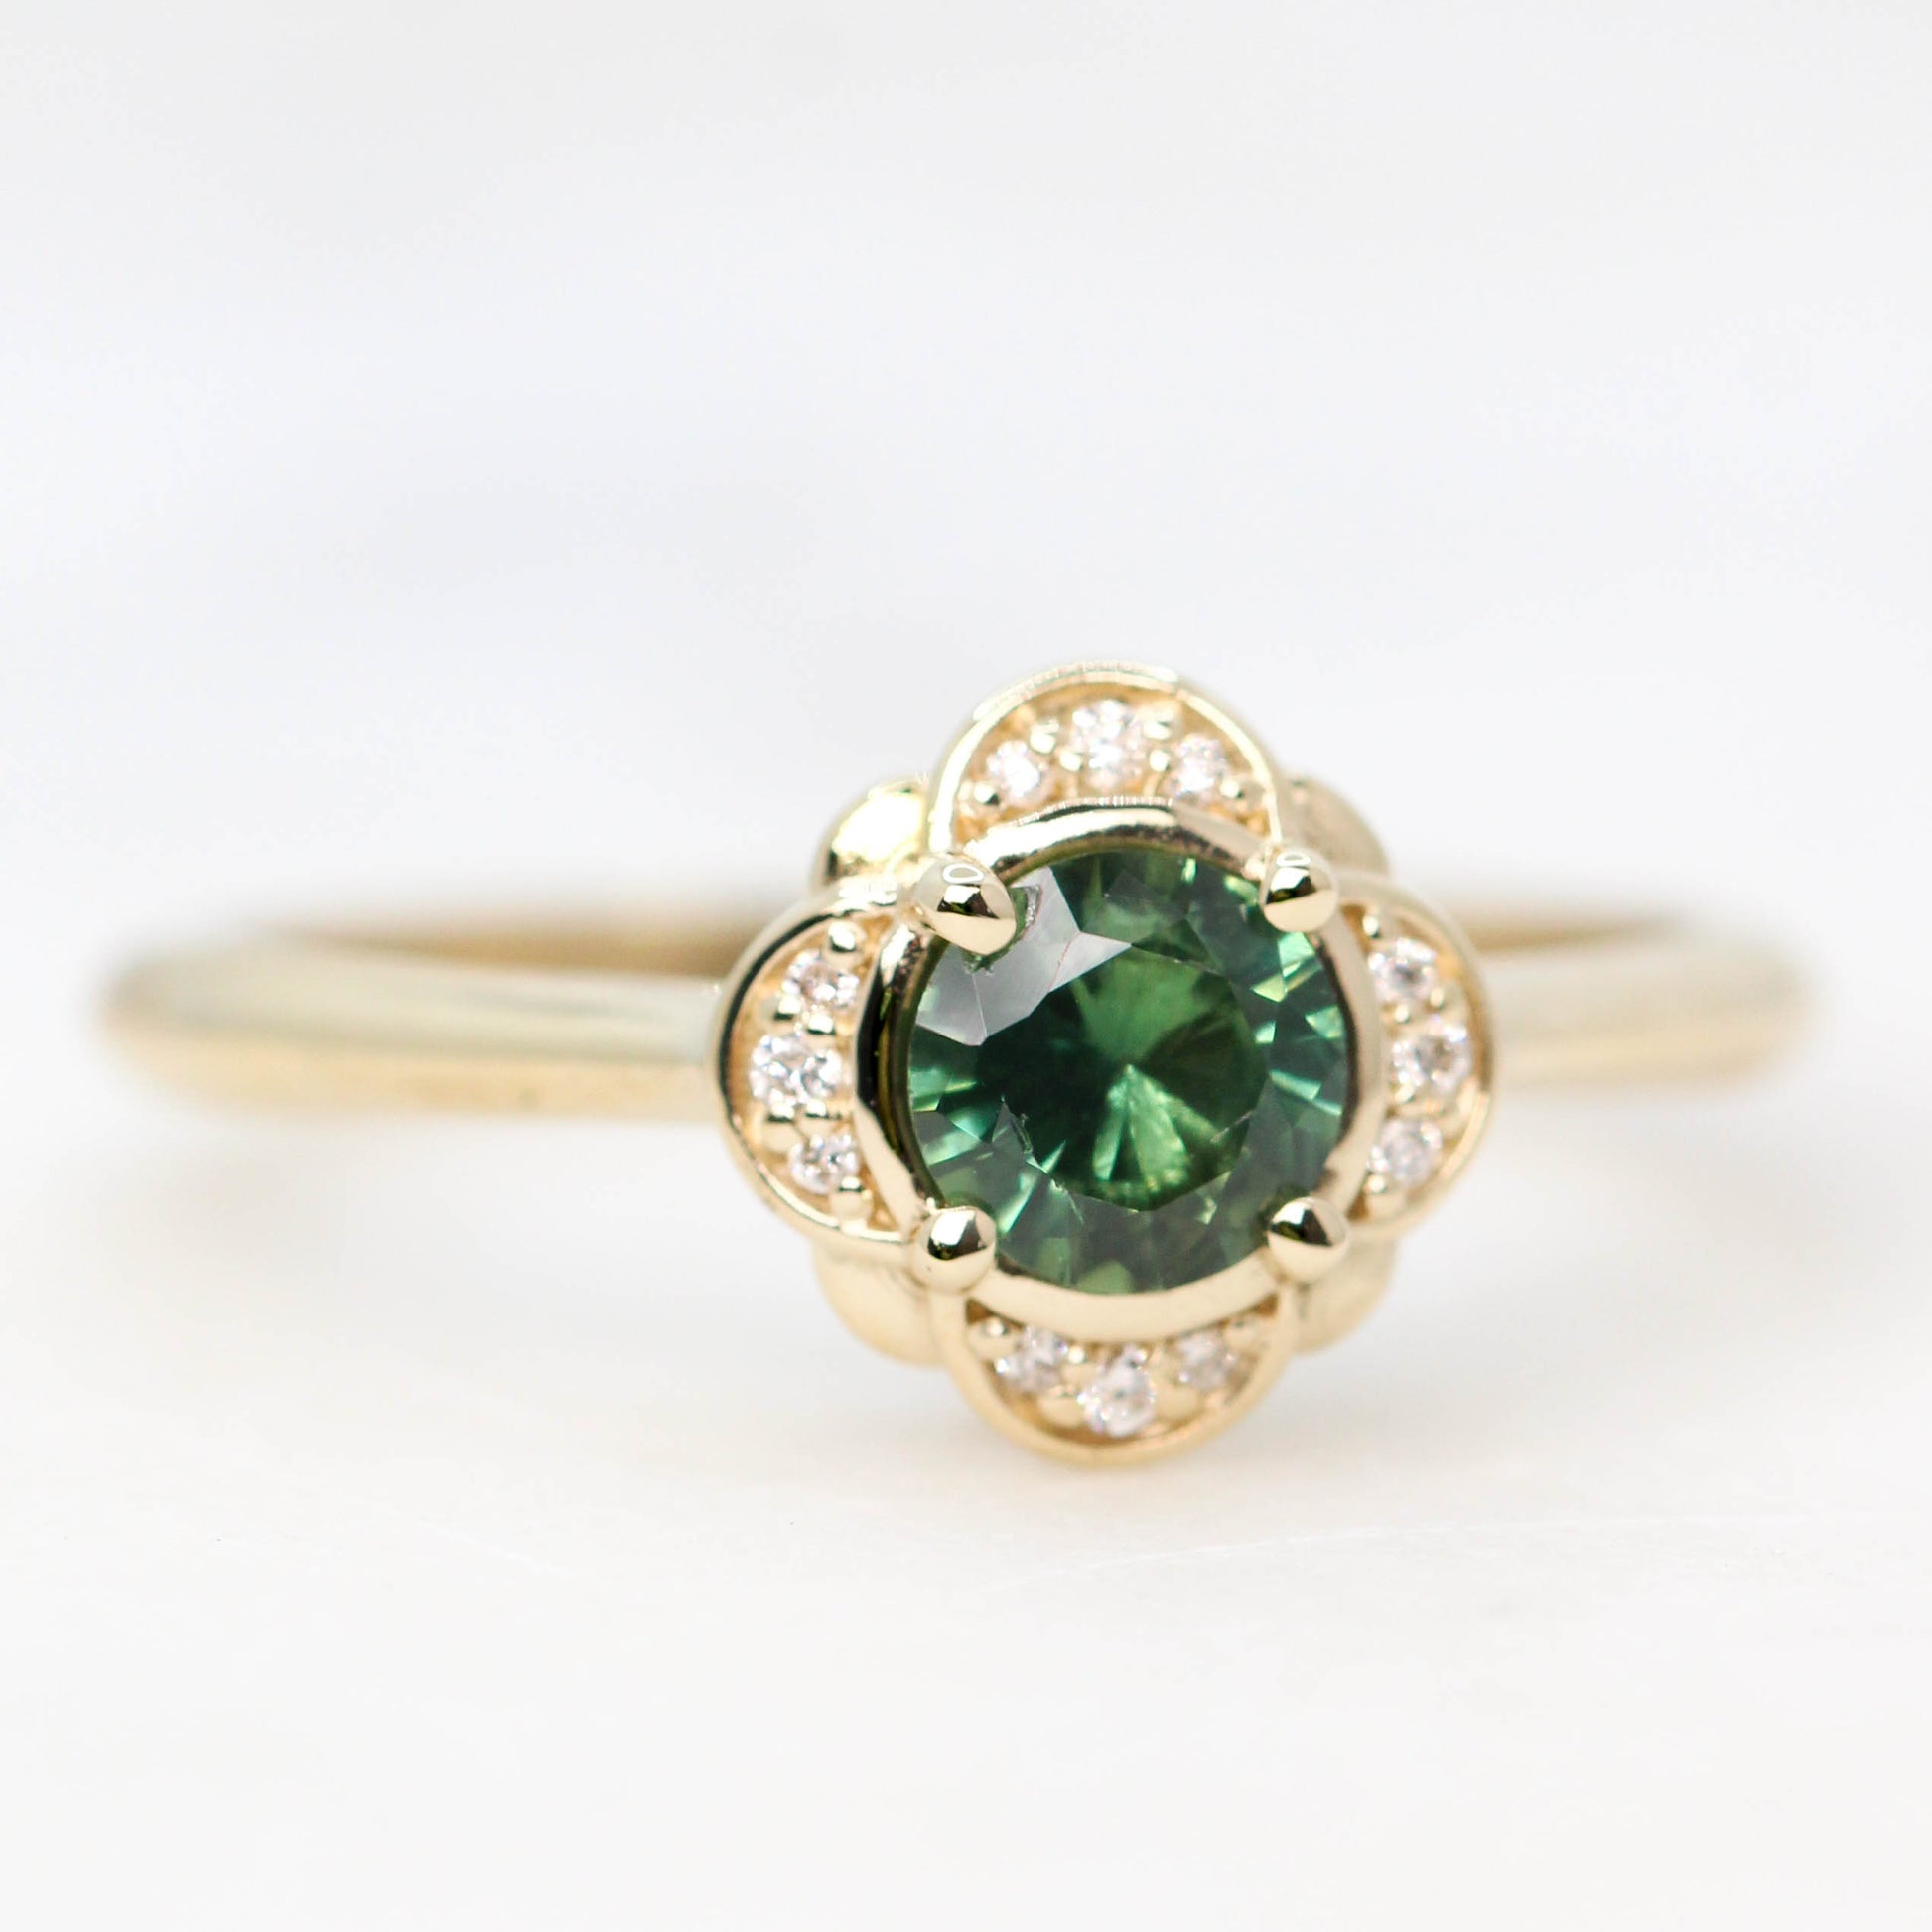 Clover Ring with a 0.47 Carat Green Round Sapphire and White Accent Diamonds in 14k Yellow Gold - Ready to Size and Ship - Midwinter Co. Alternative Bridal Rings and Modern Fine Jewelry